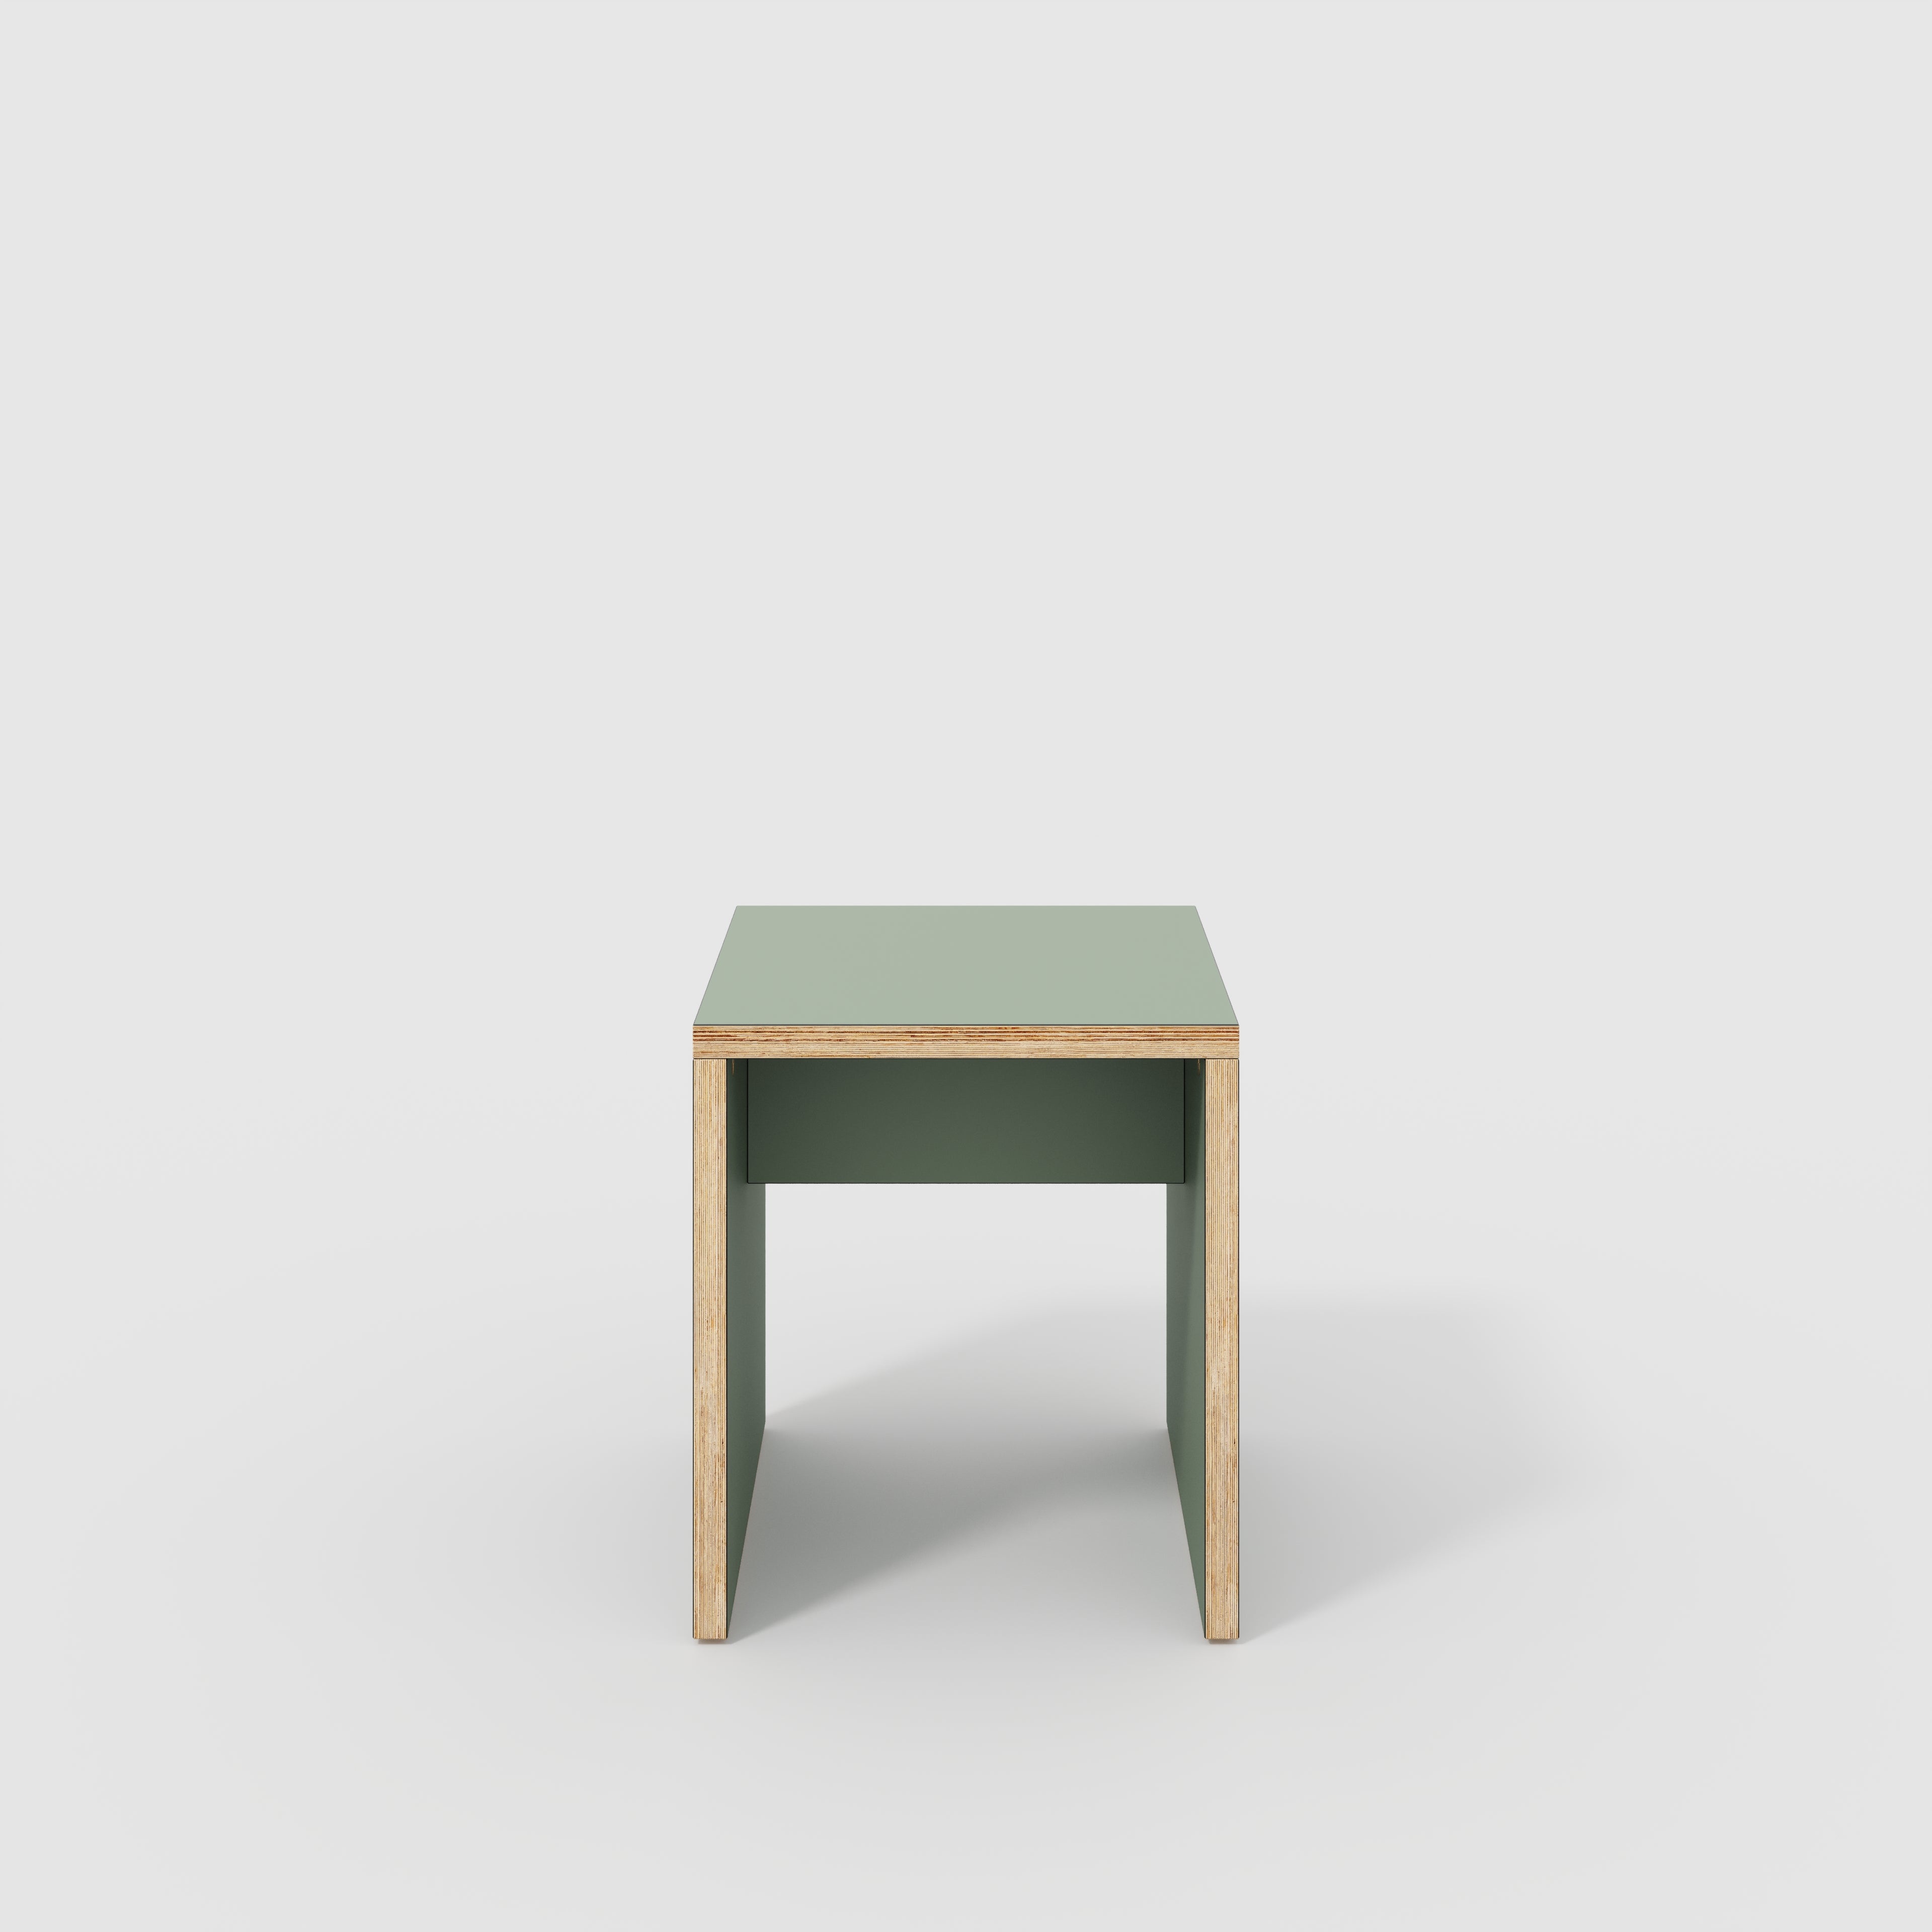 Stool with Solid Sides - Formica Green Slate - 400(w) x 400(d) x 450(h)